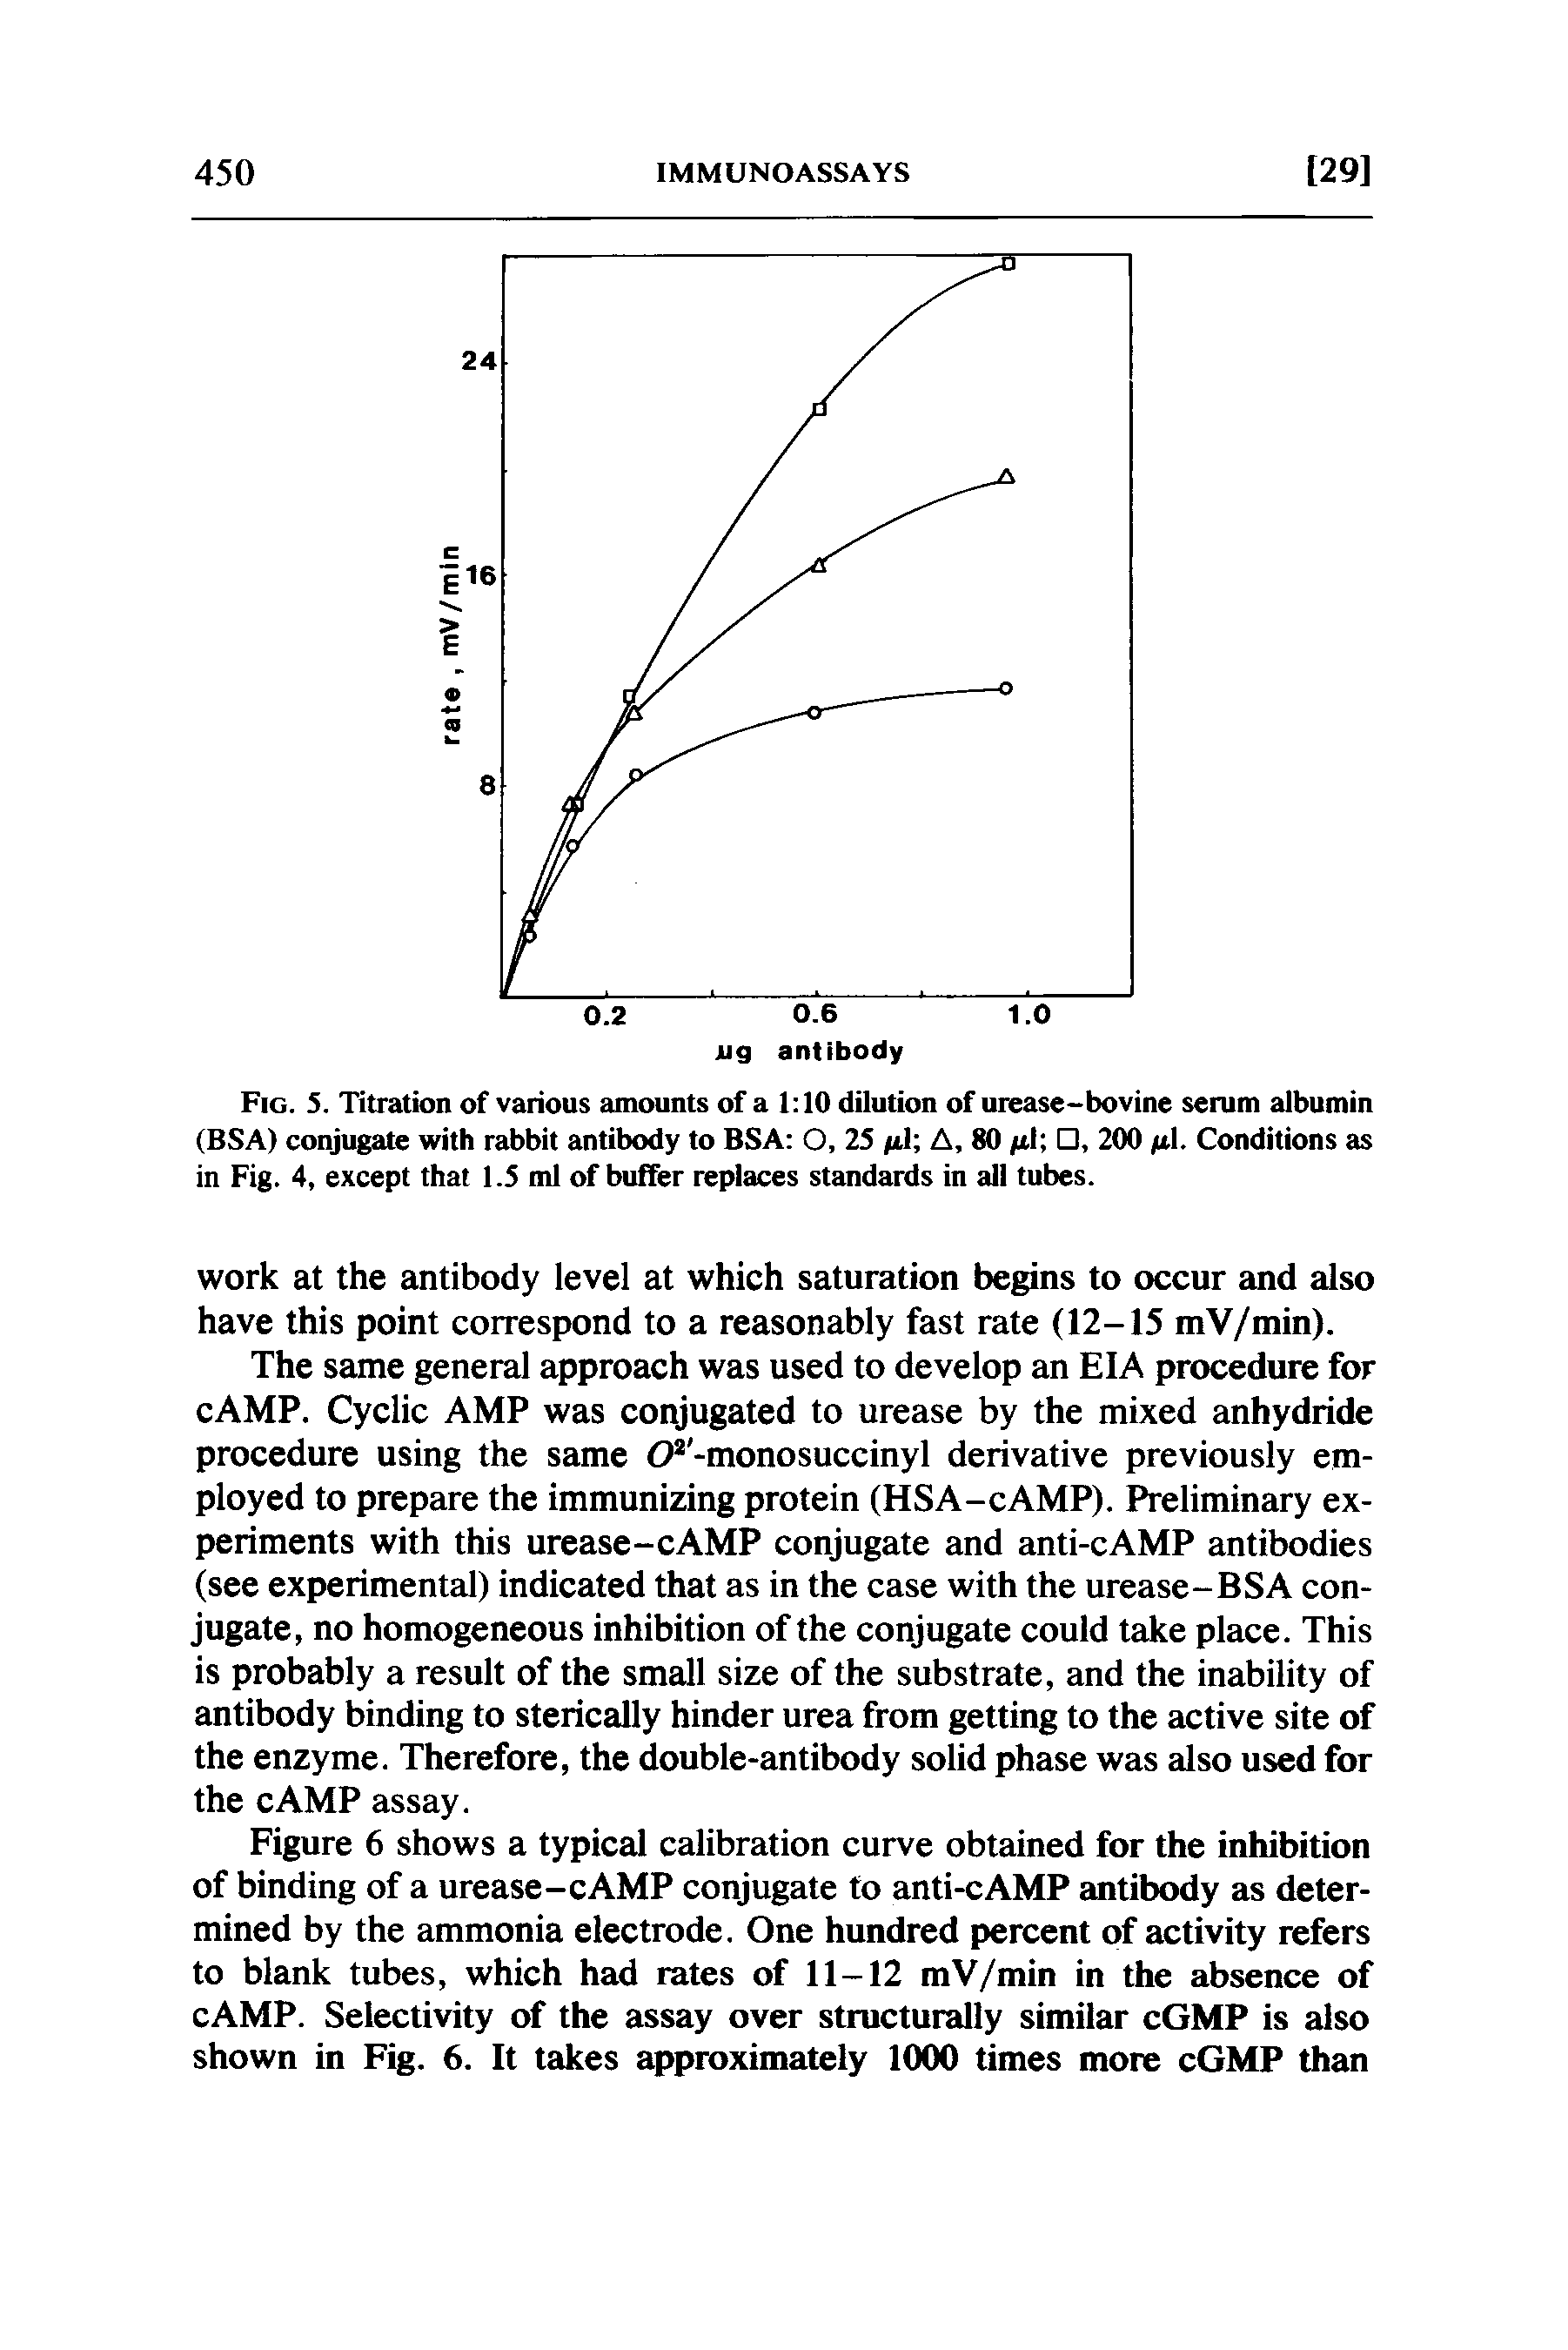 Fig. 5. Titration of various amounts of a 1 10 dilution of urease-bovine serum albumin (BSA) conjugate with rabbit antibody to BSA O, 25 fil A, 80 /il , 200 /u.1. Conditions as in Fig. 4, except that 1.5 ml of buffer replaces standards in all tubes.